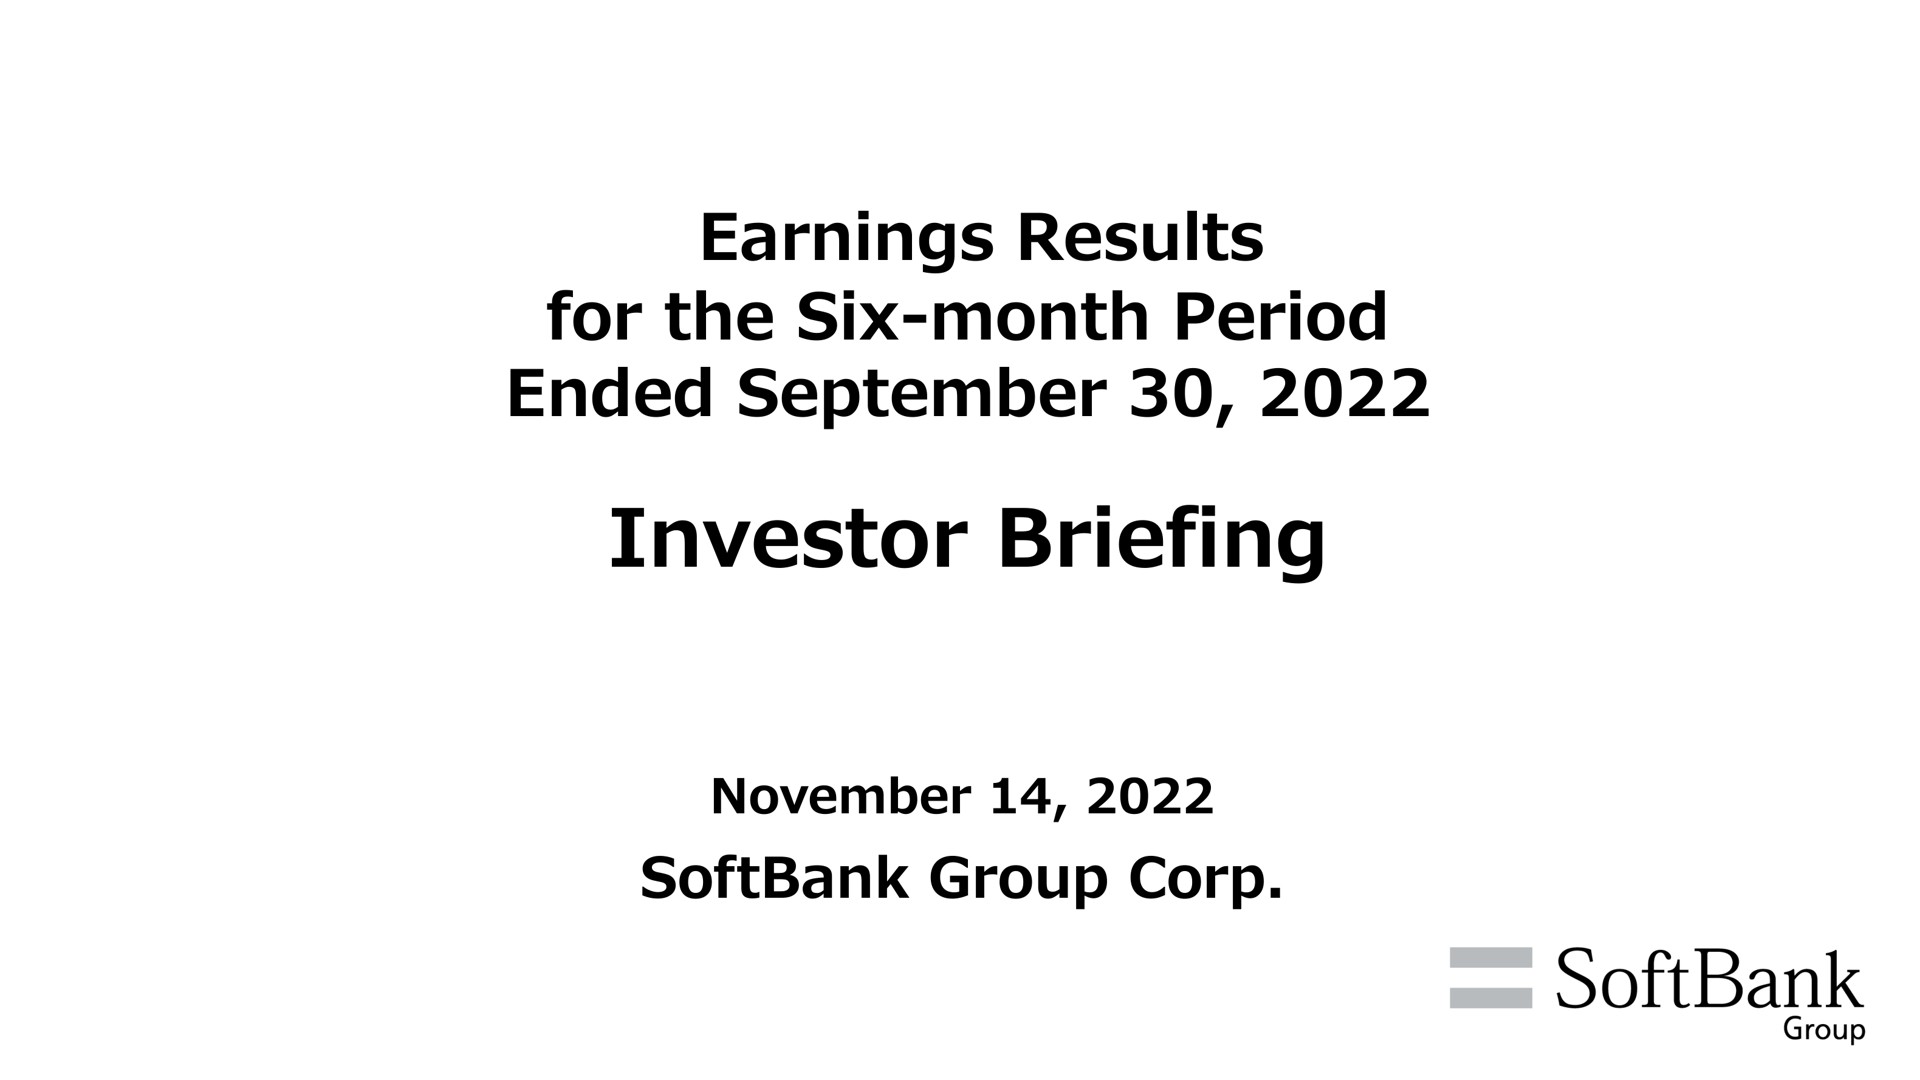 earnings results for the six month period ended investor briefing group corp | SoftBank